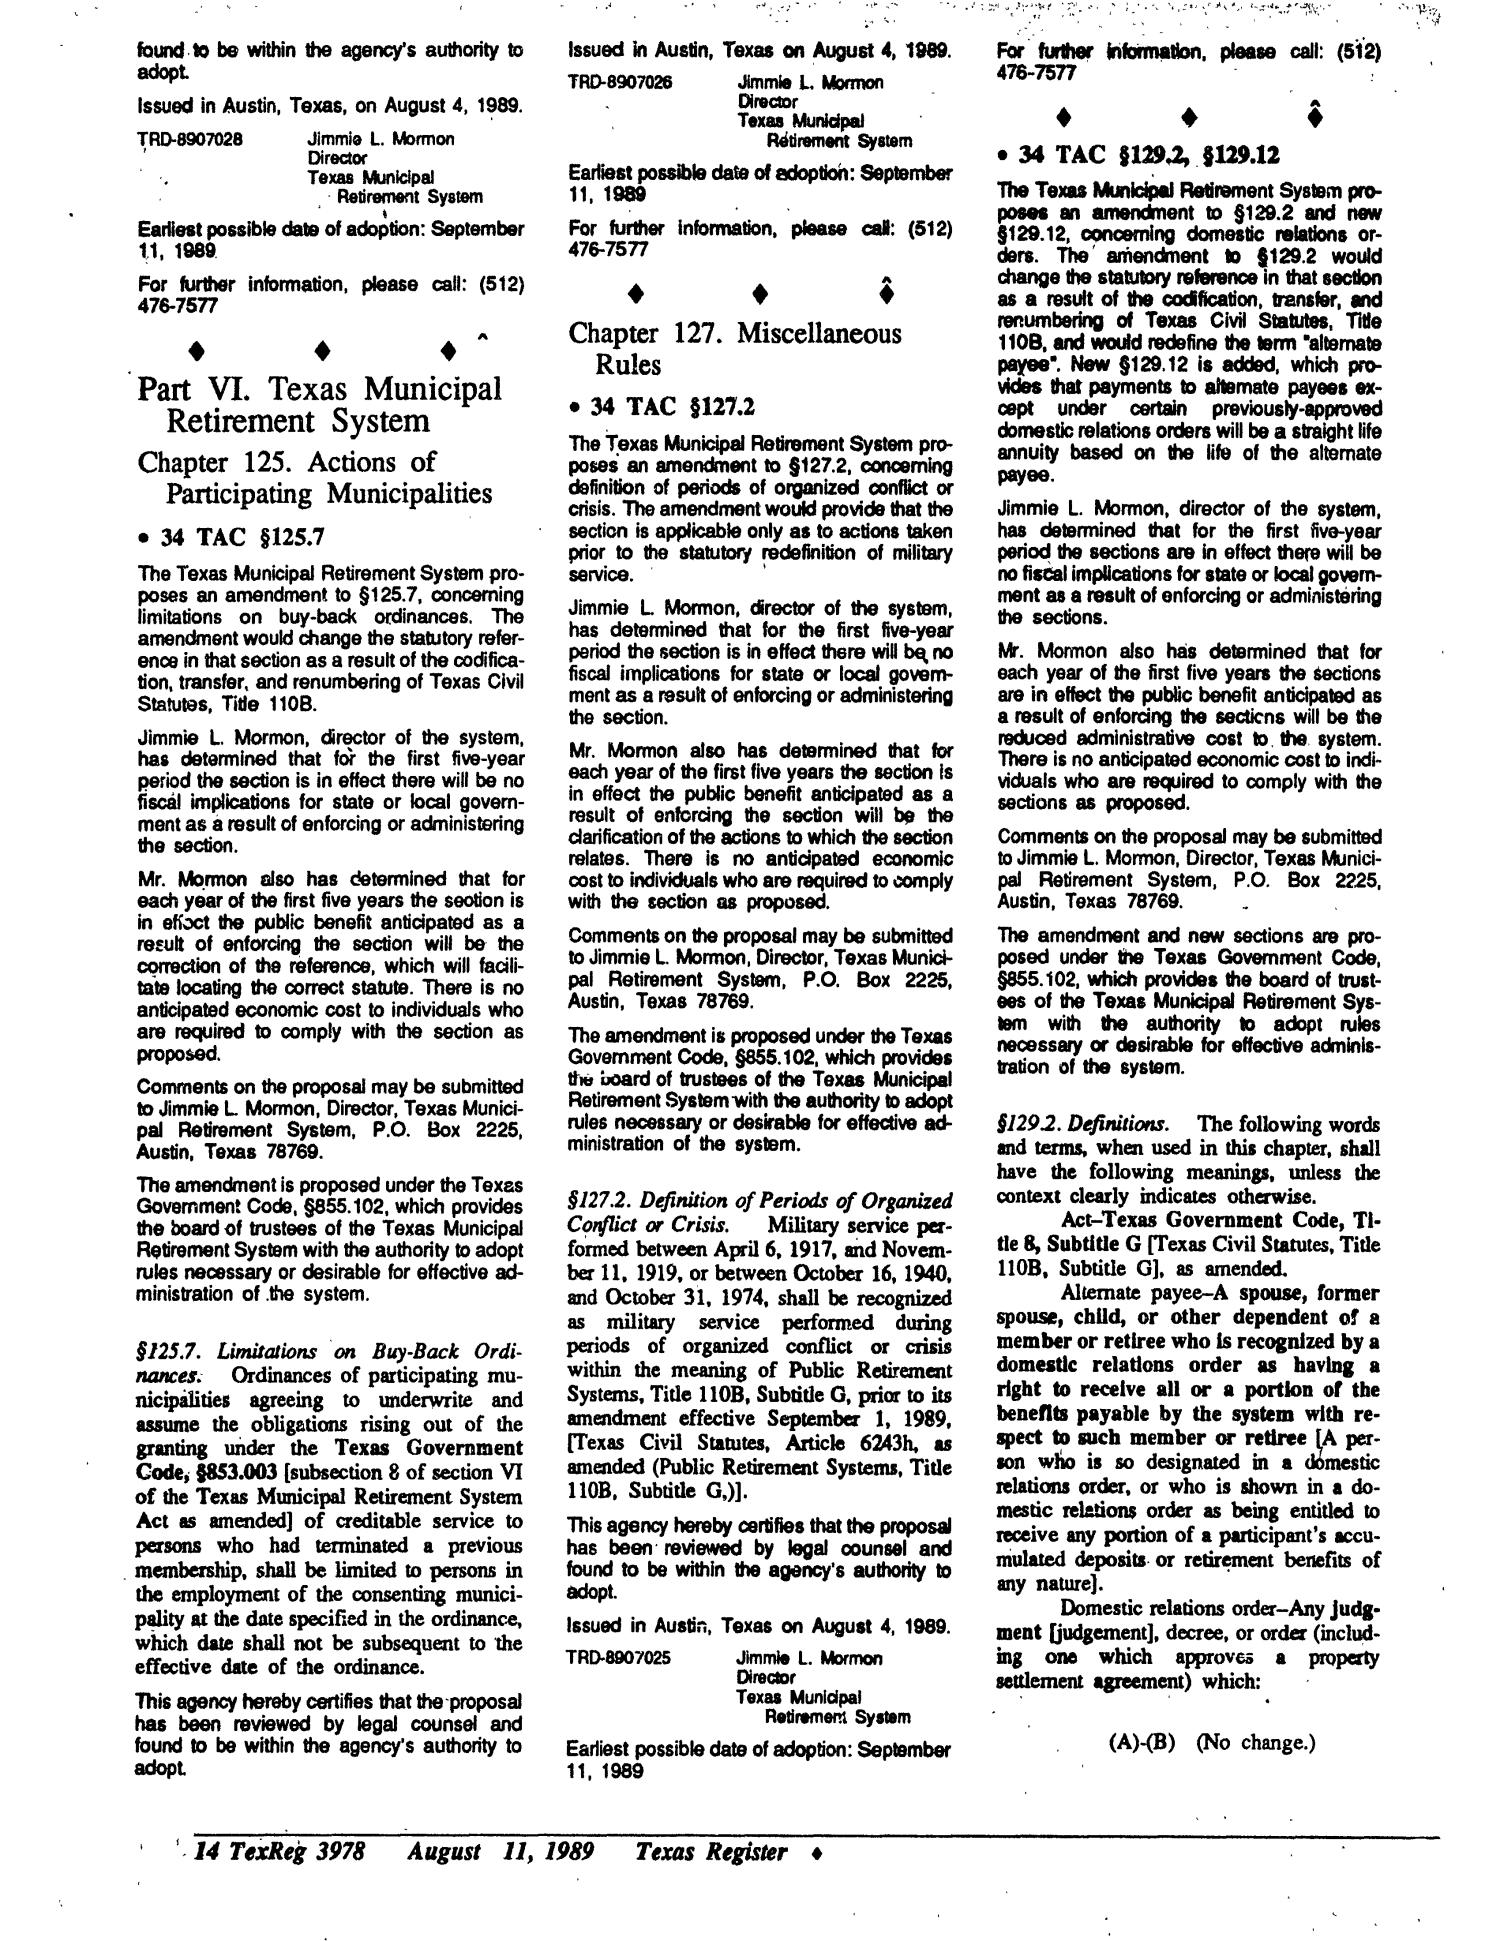 Texas Register, Volume 14, Number 58, Pages 3953-4016, August 11, 1989
                                                
                                                    3978
                                                